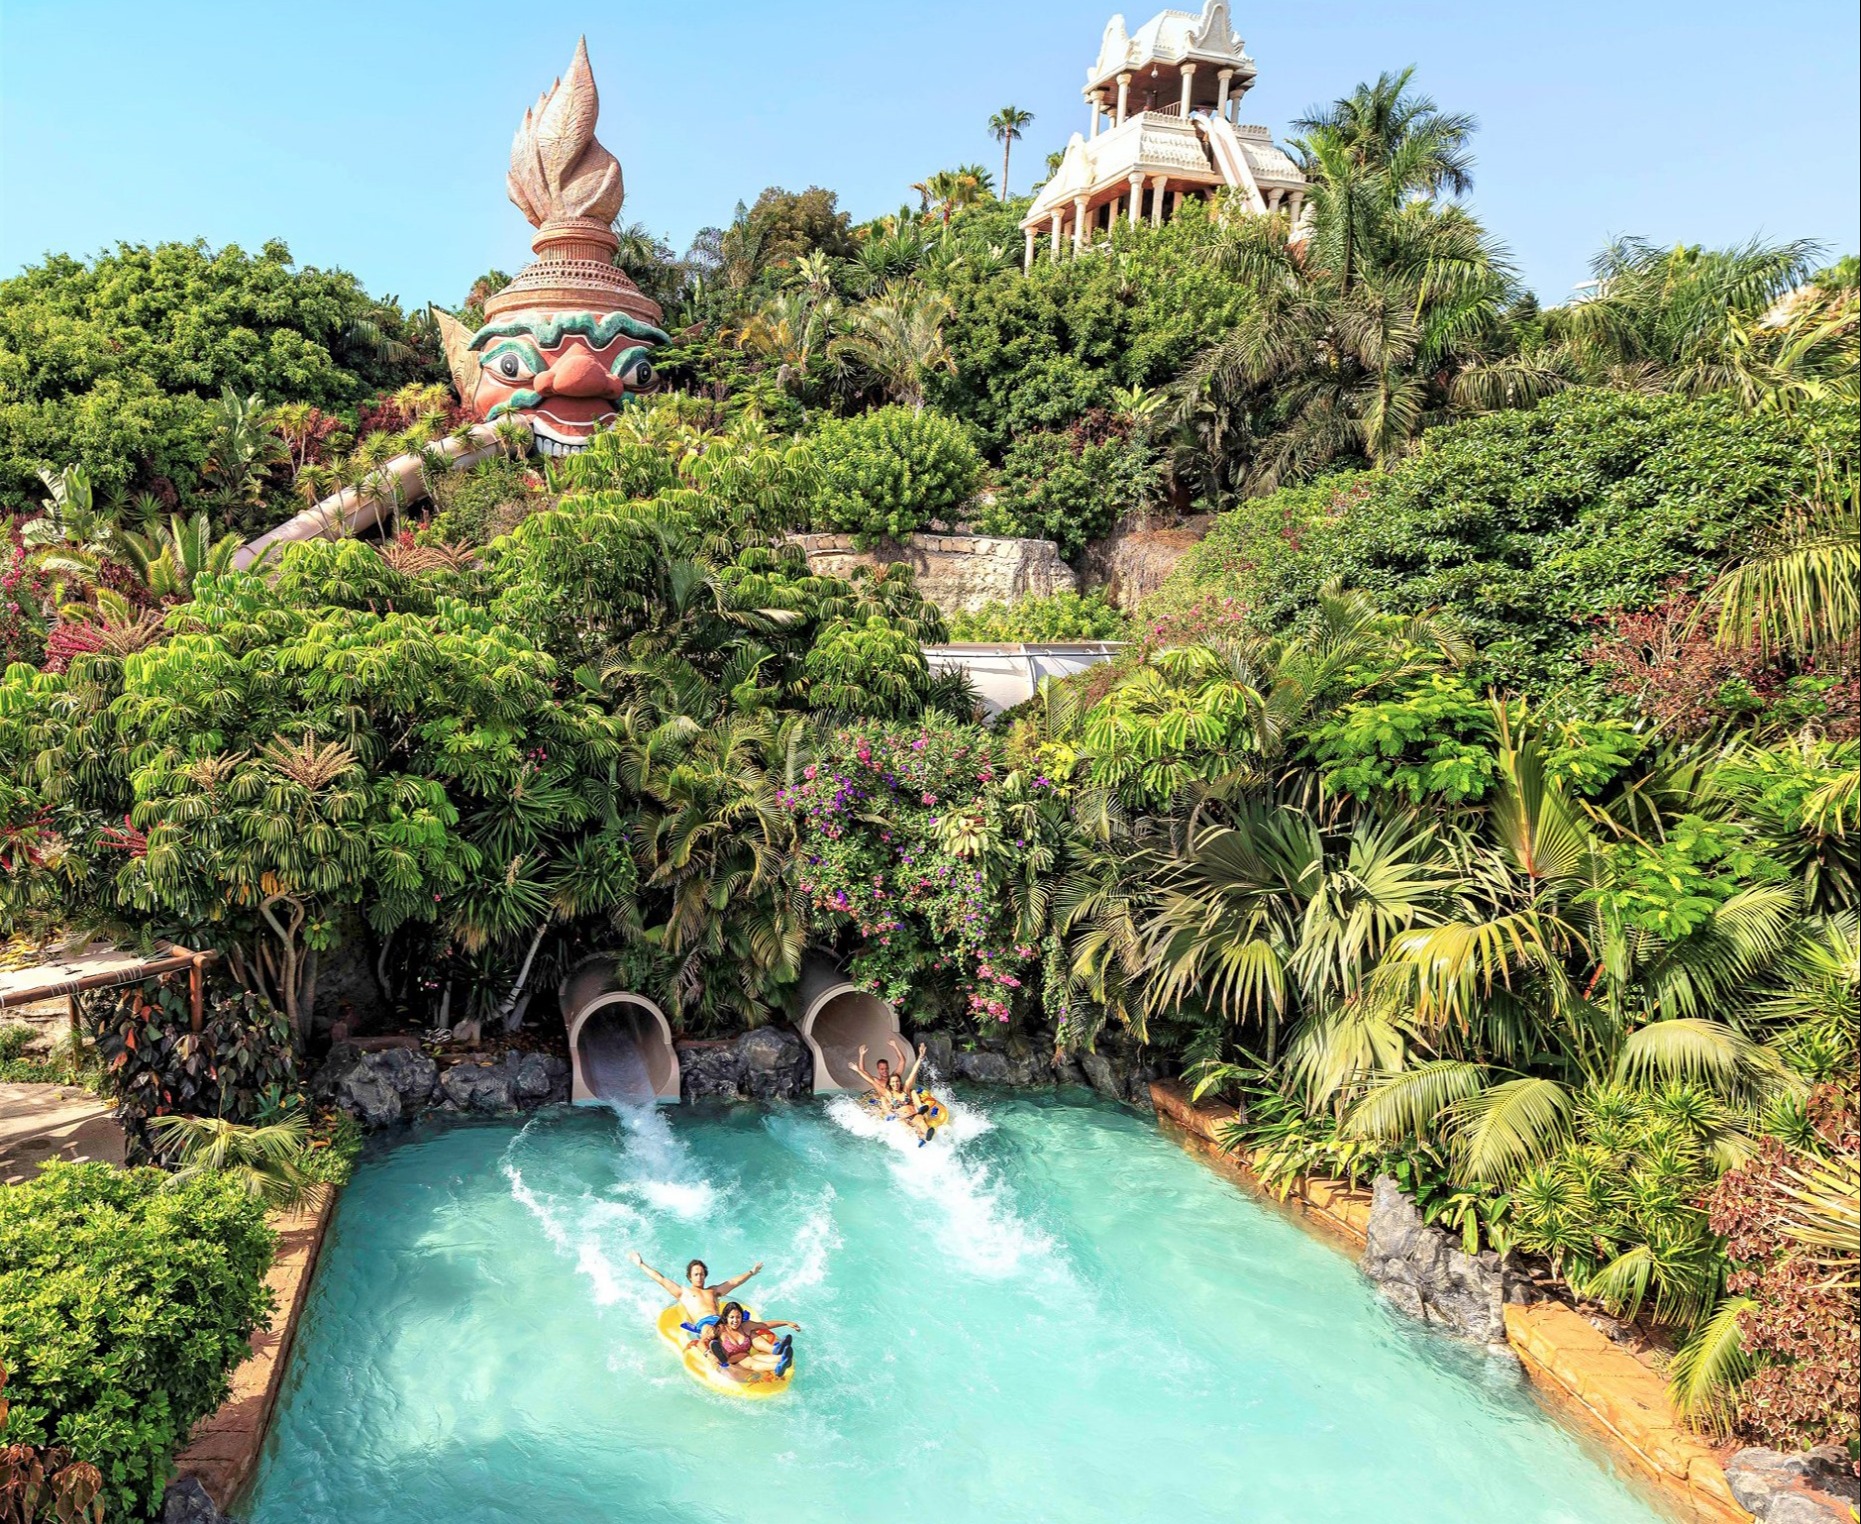 Guests at the Villa Mandi resort get unlimited access to Siam Park Waterpark